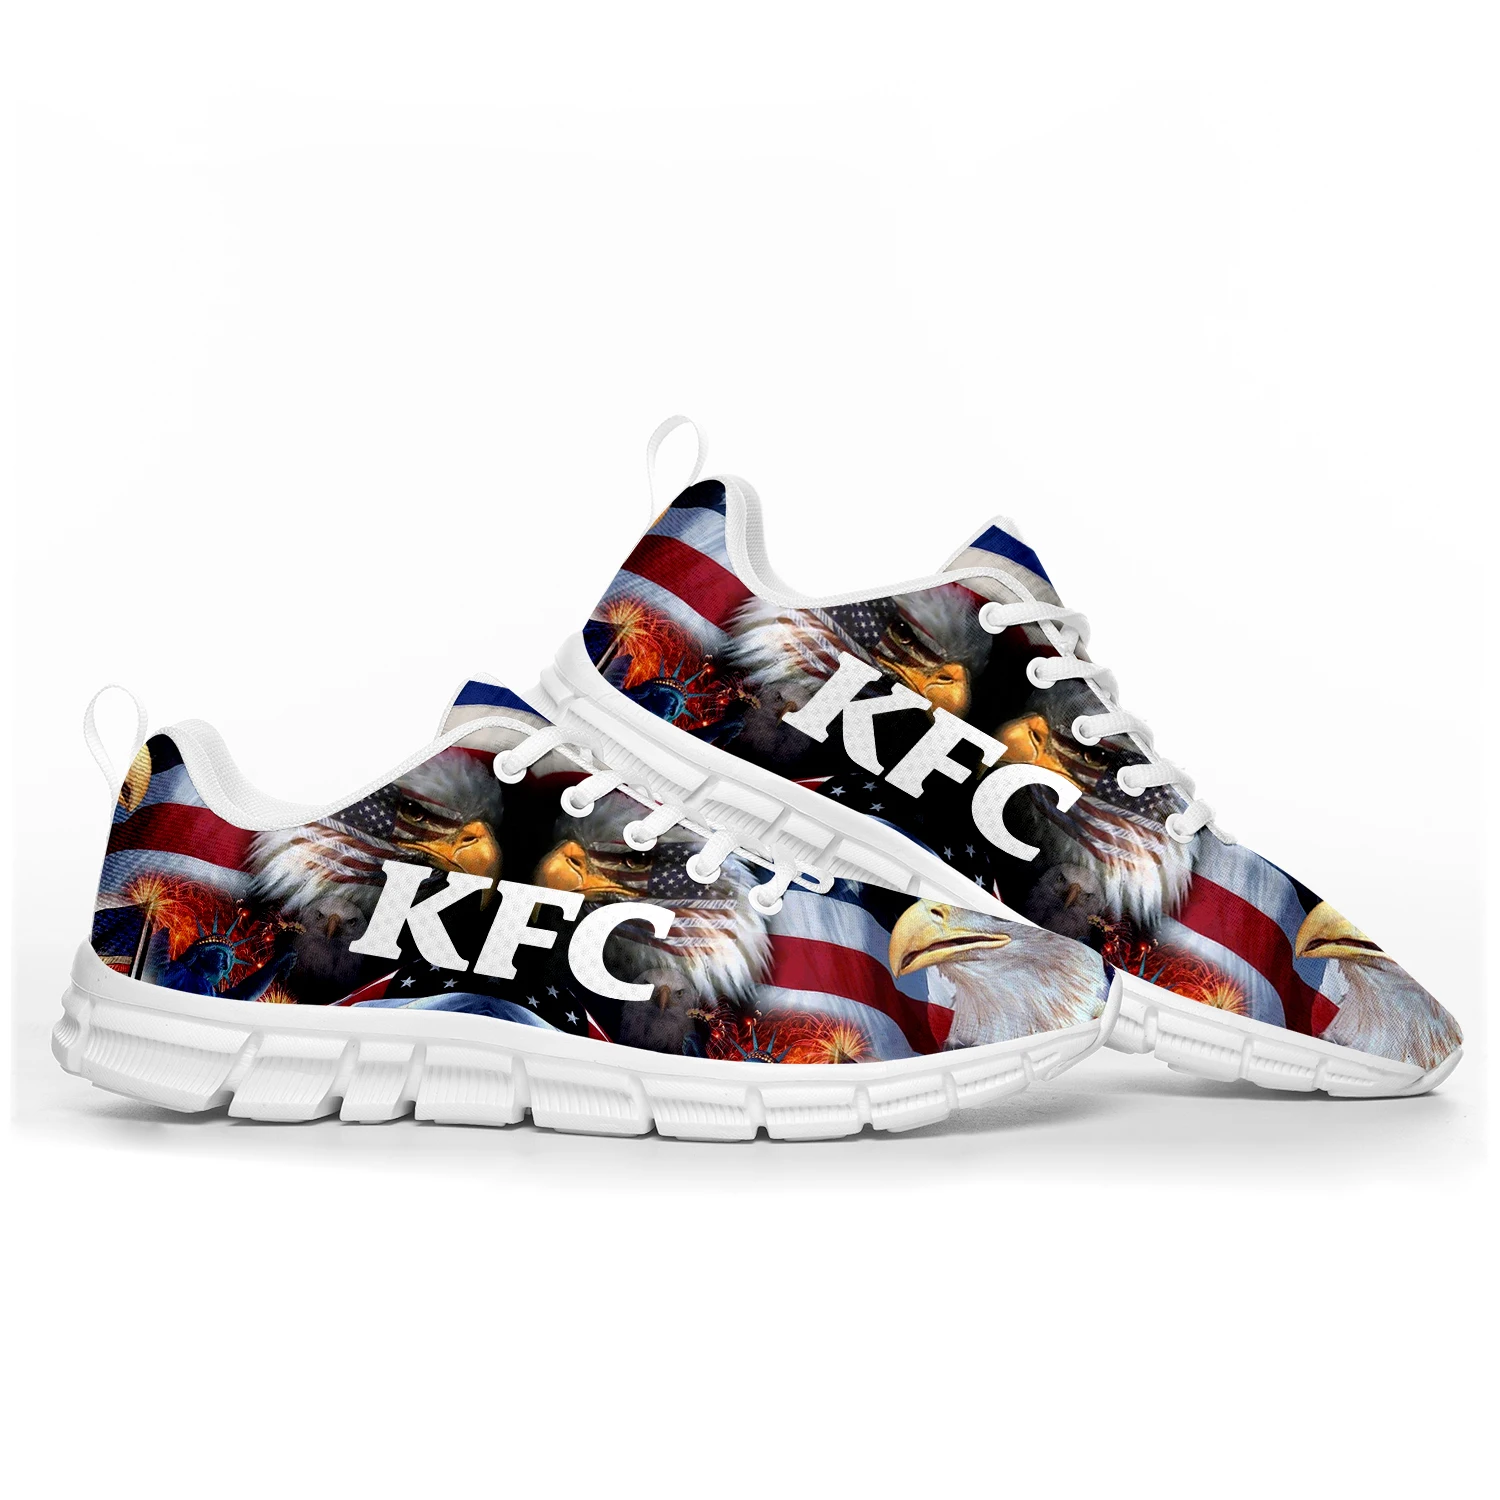 

Kentucky Fried Chicken Sports Shoes Mens Womens Teenager Kids Children Customized Sneakers Tailor-Made Shoe High Quality Couple